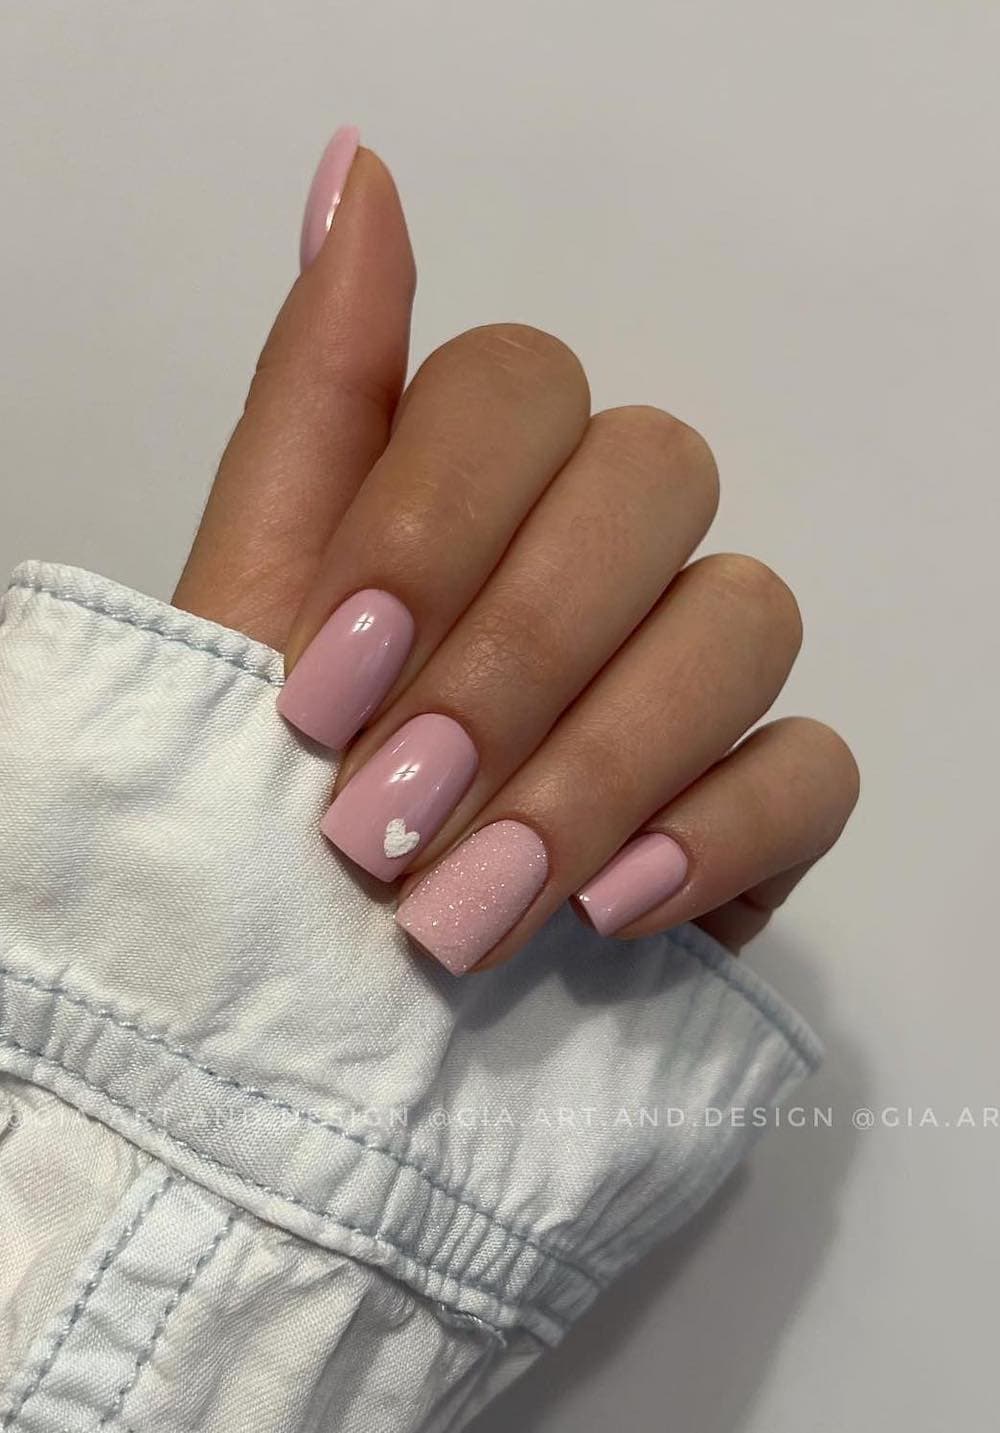 A hand with short square nails painted a dusty pink with a glitter coated accent nail and a white heart detail